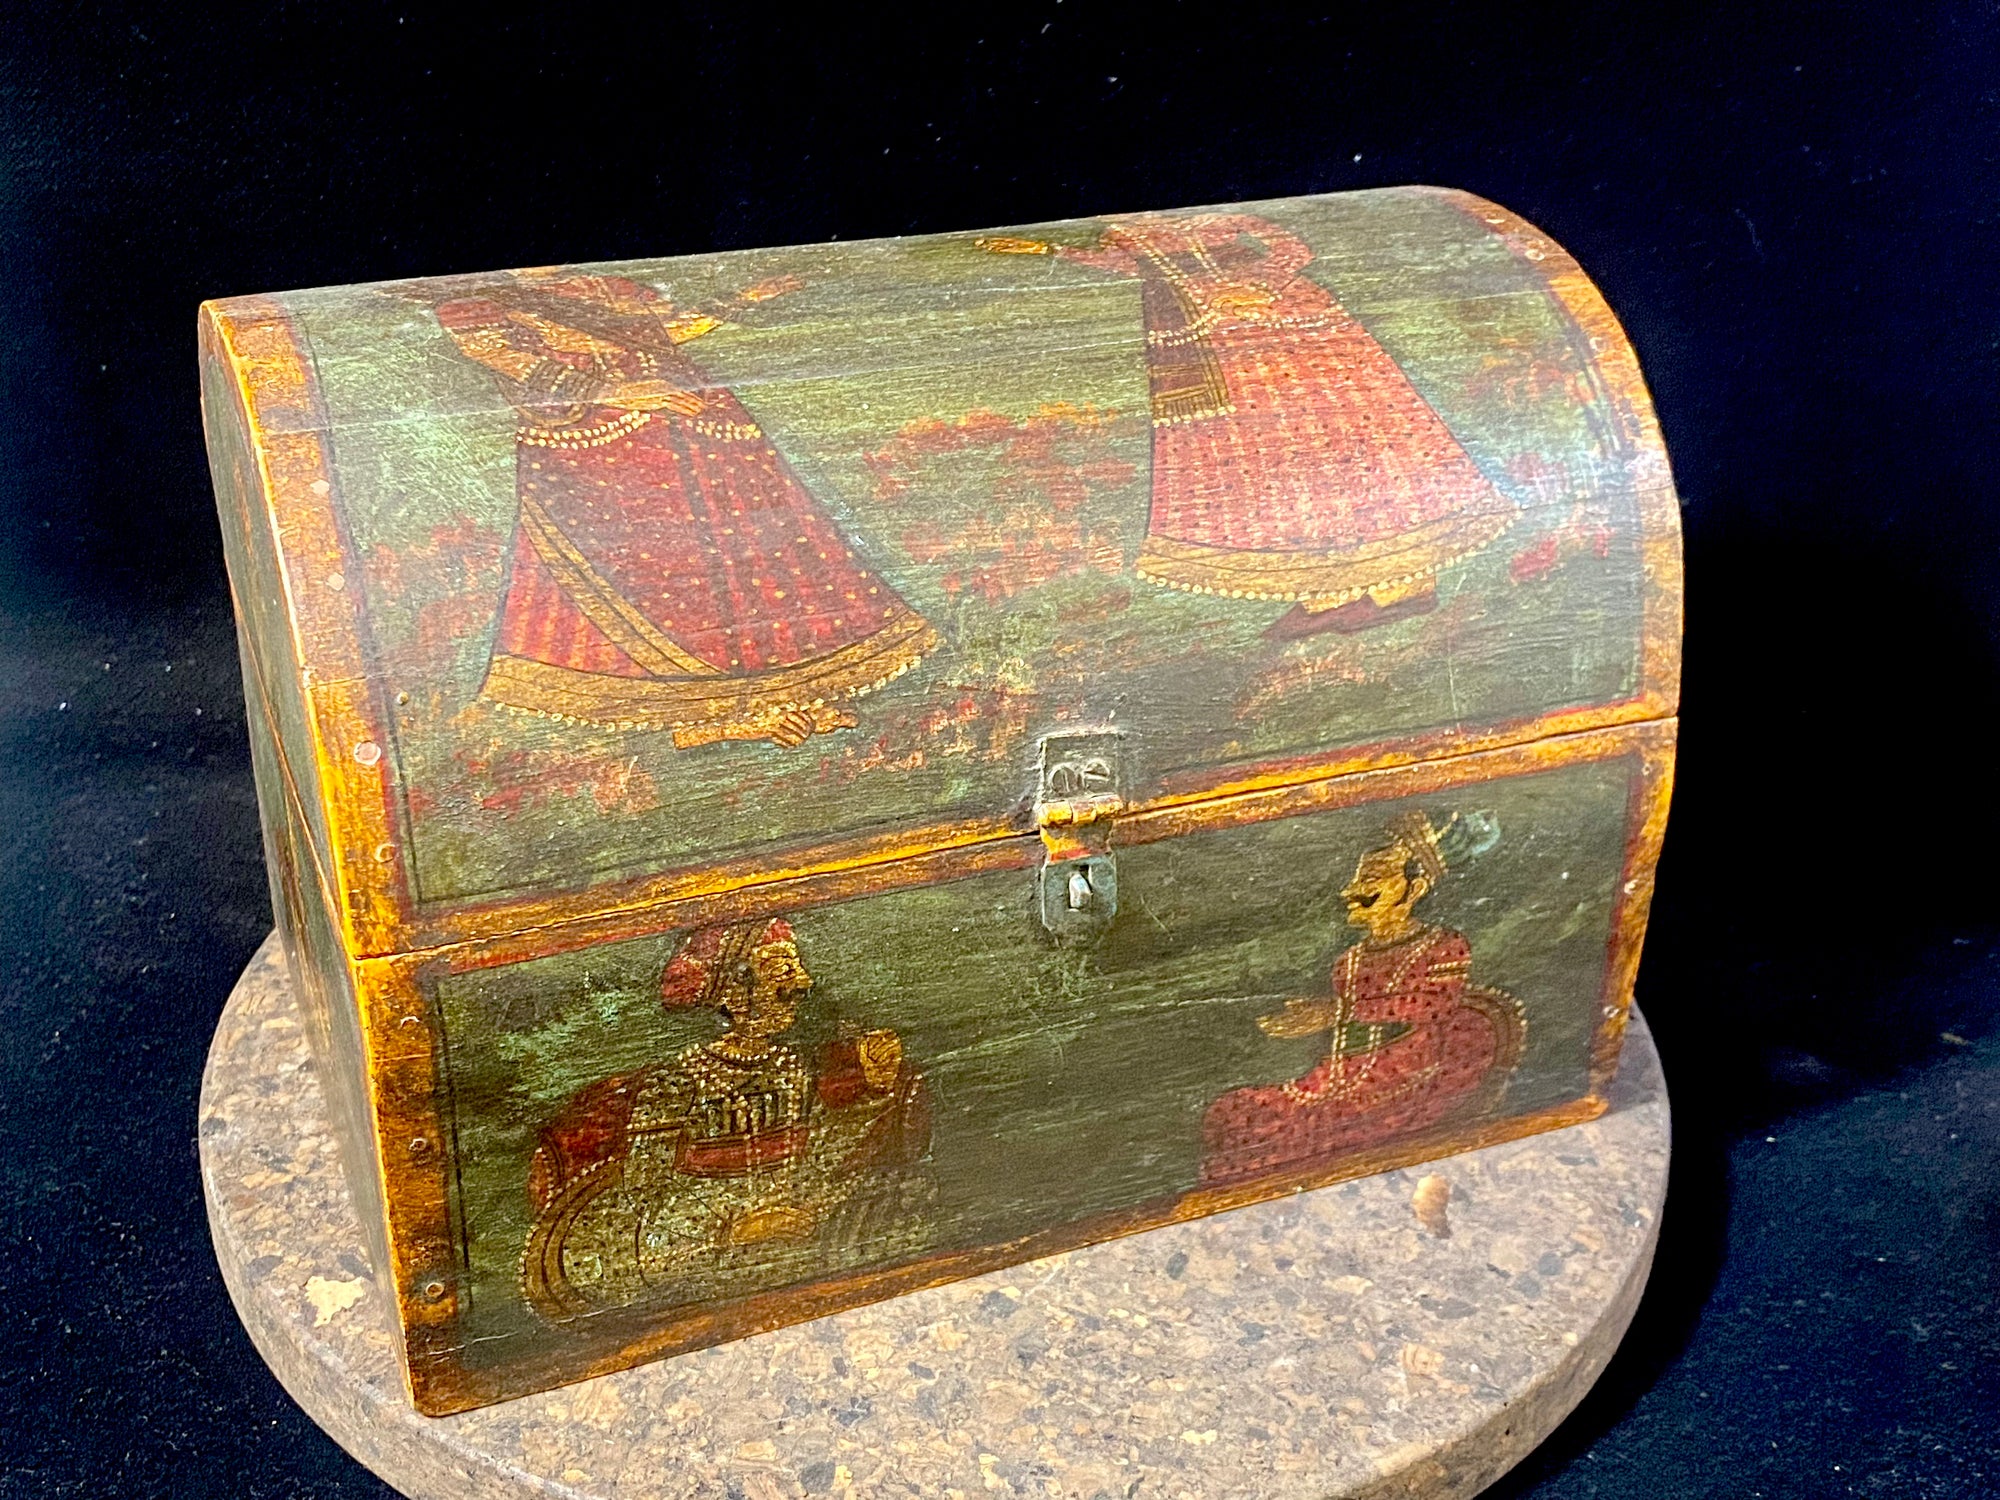 A lovely old painted Indian chest with domed top in the shape of a treasure chest. Painted on all sides with images of Indian lords and ladies. Made from teak. This would make a lovely trinket box, key box, jewellery, watch or cufflink box. Circa 1940. Measurements: length 24 cm x depth 15.5 cm, height 16 cm